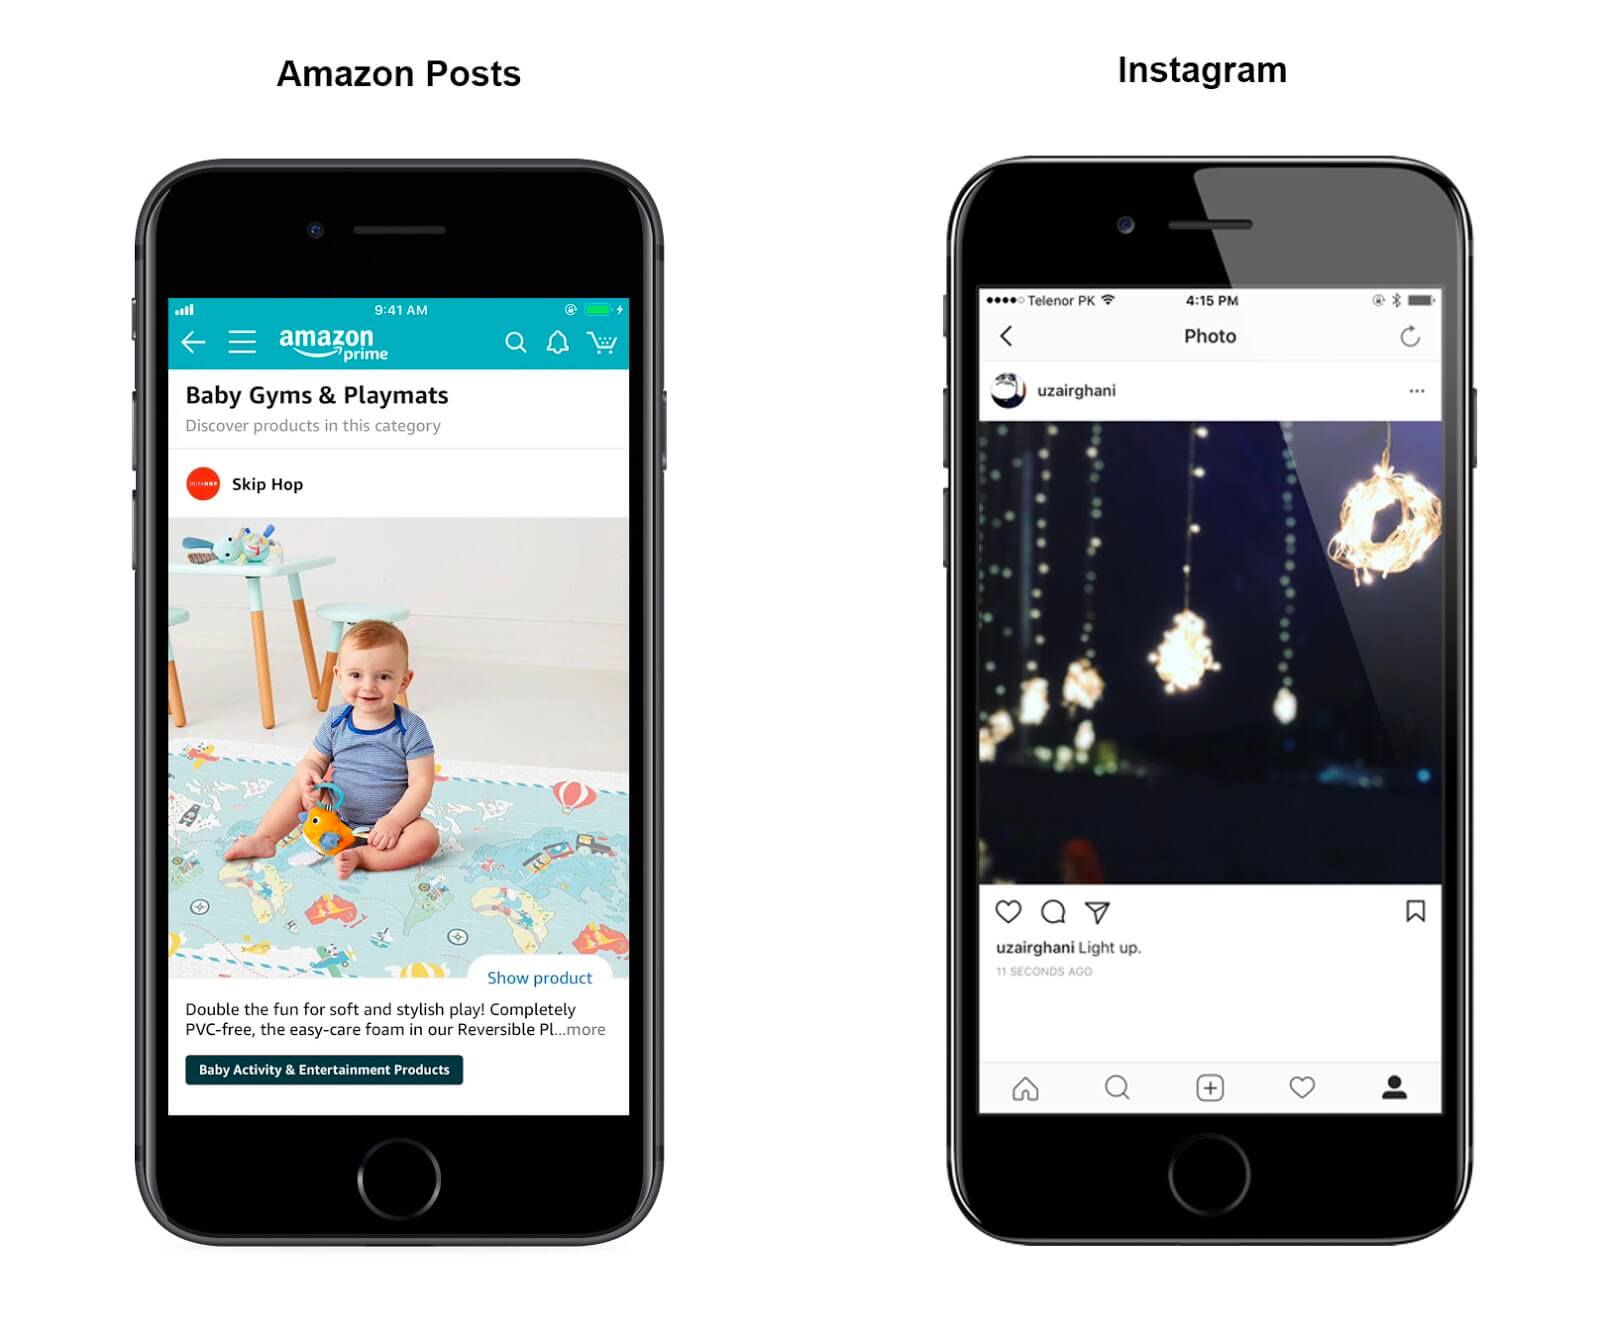 Amazon Posts: comparison of pages with Instagram